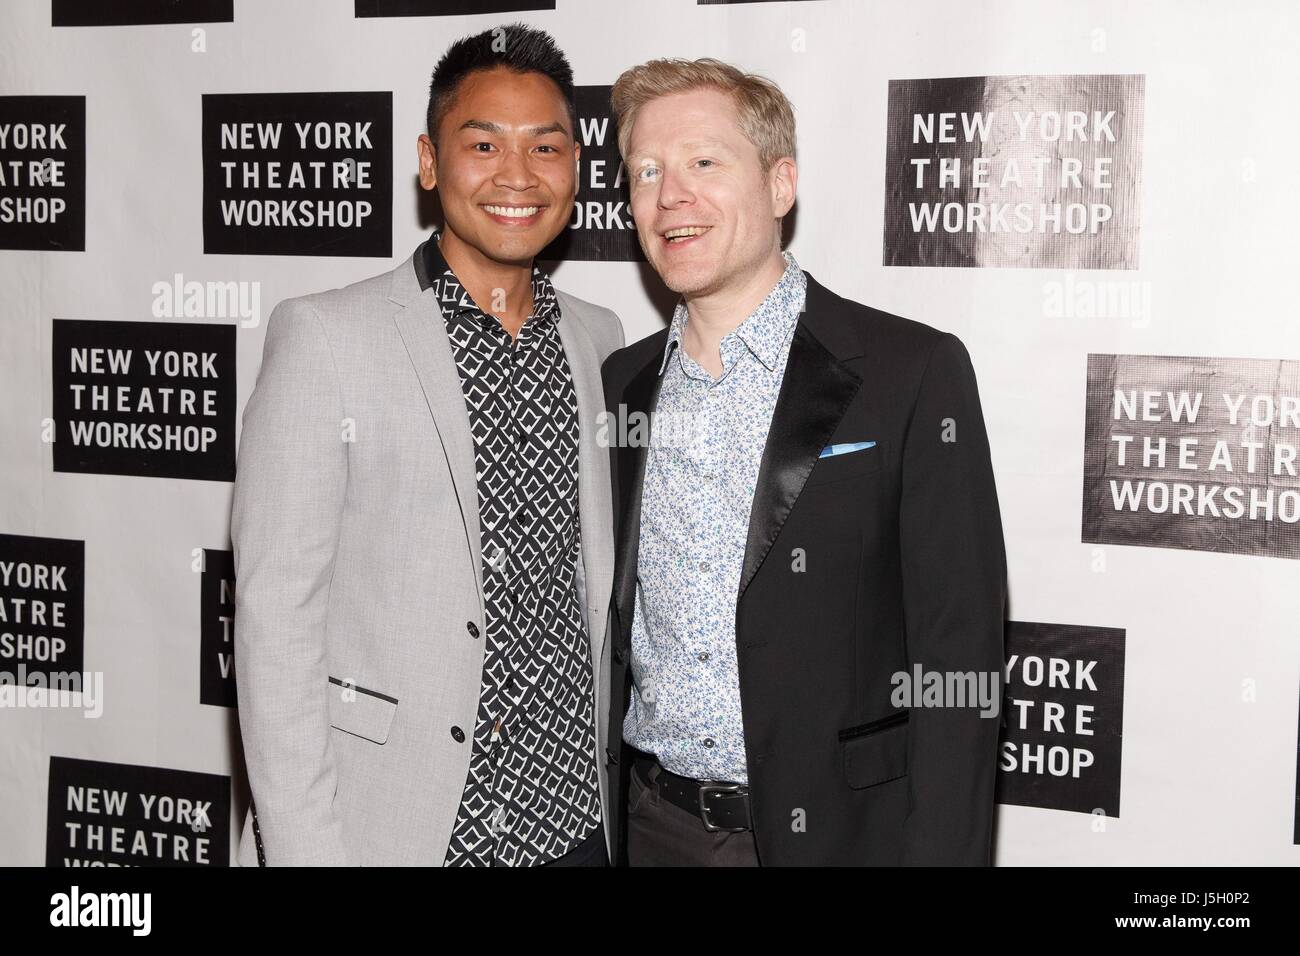 New York, NY, USA. 15th May, 2017. Ken Ithiphol, Anthony Rapp at arrivals for New York Theatre Workshop's 2017 Spring Gala, The Edison Ballroom, New York, NY May 15, 2017. Credit: Jason Smith/Everett Collection/Alamy Live News Stock Photo